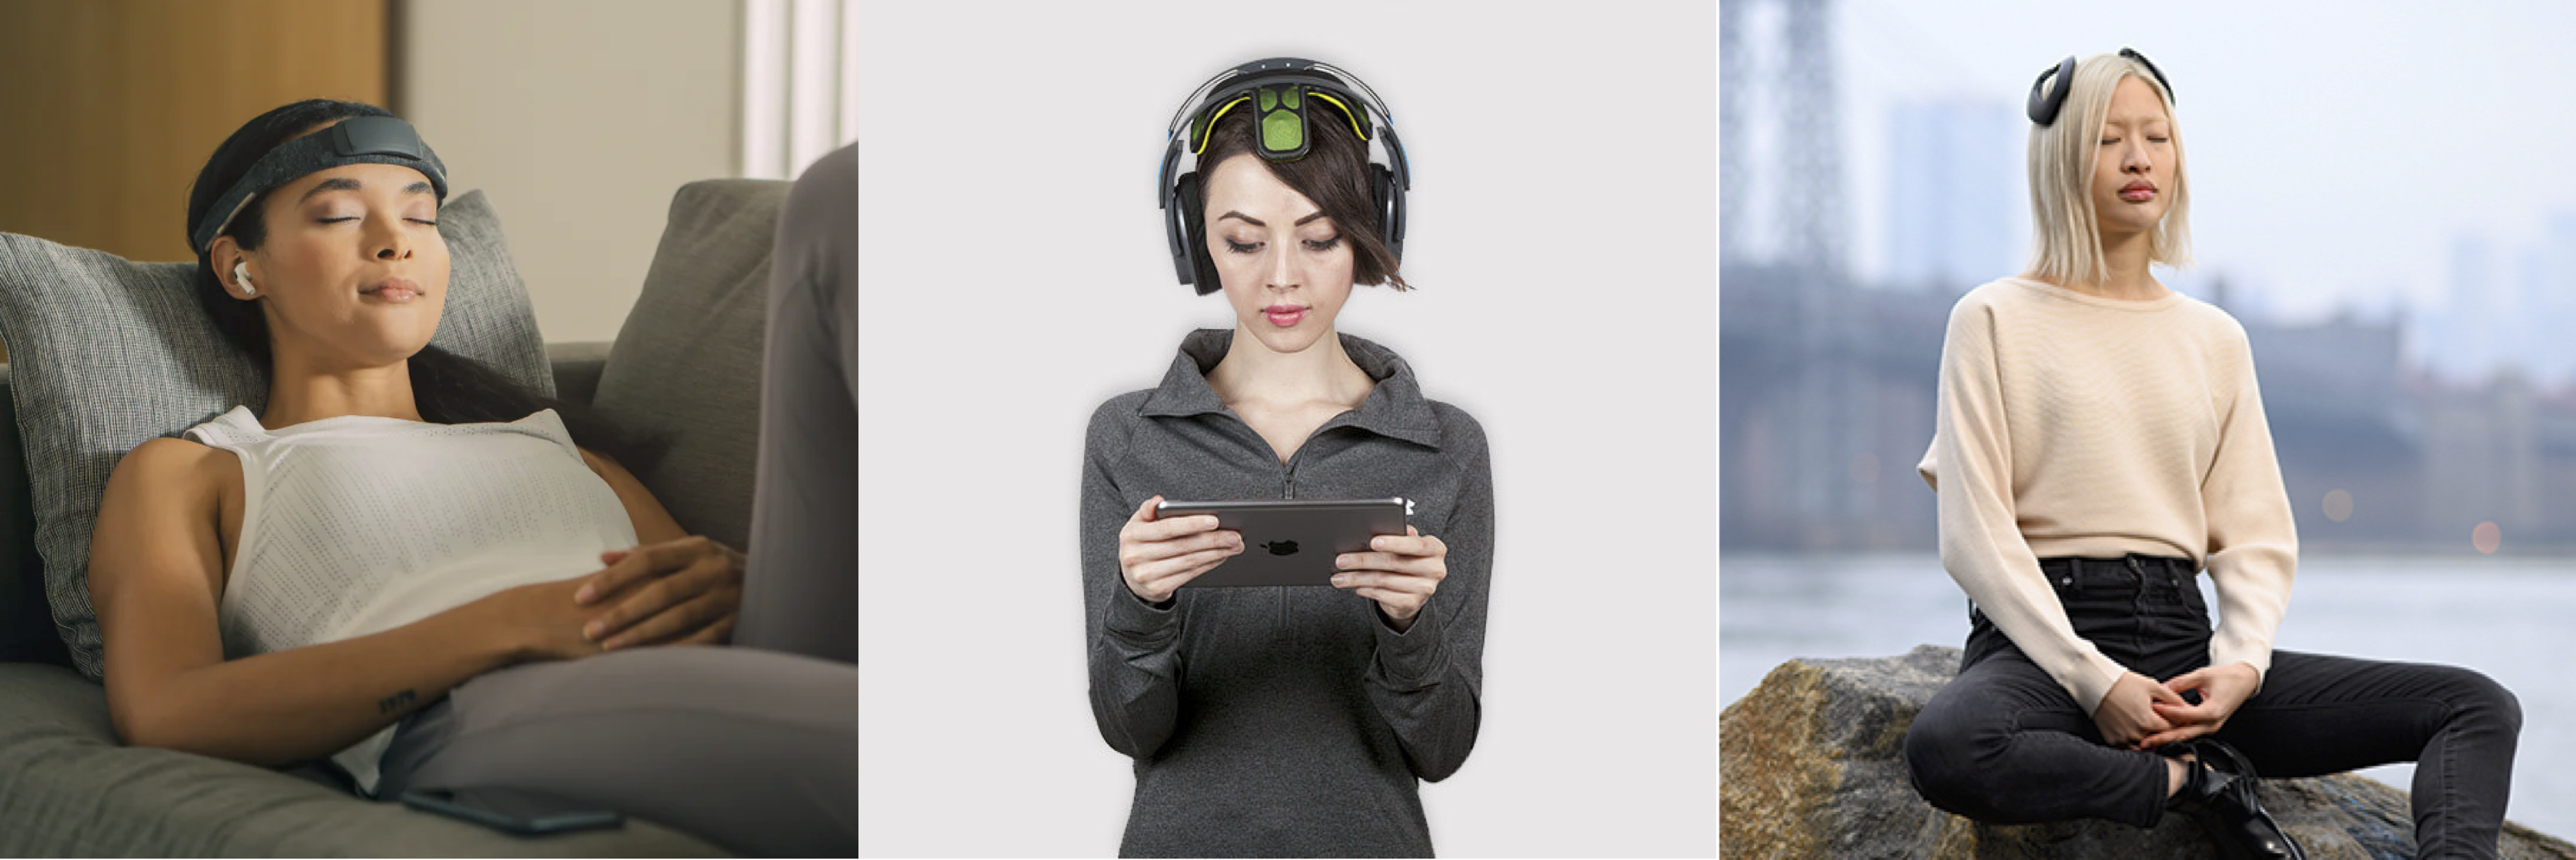 Image showing three people wearing different consumer neurotechnology headsets, in seemingly peaceful conditions.